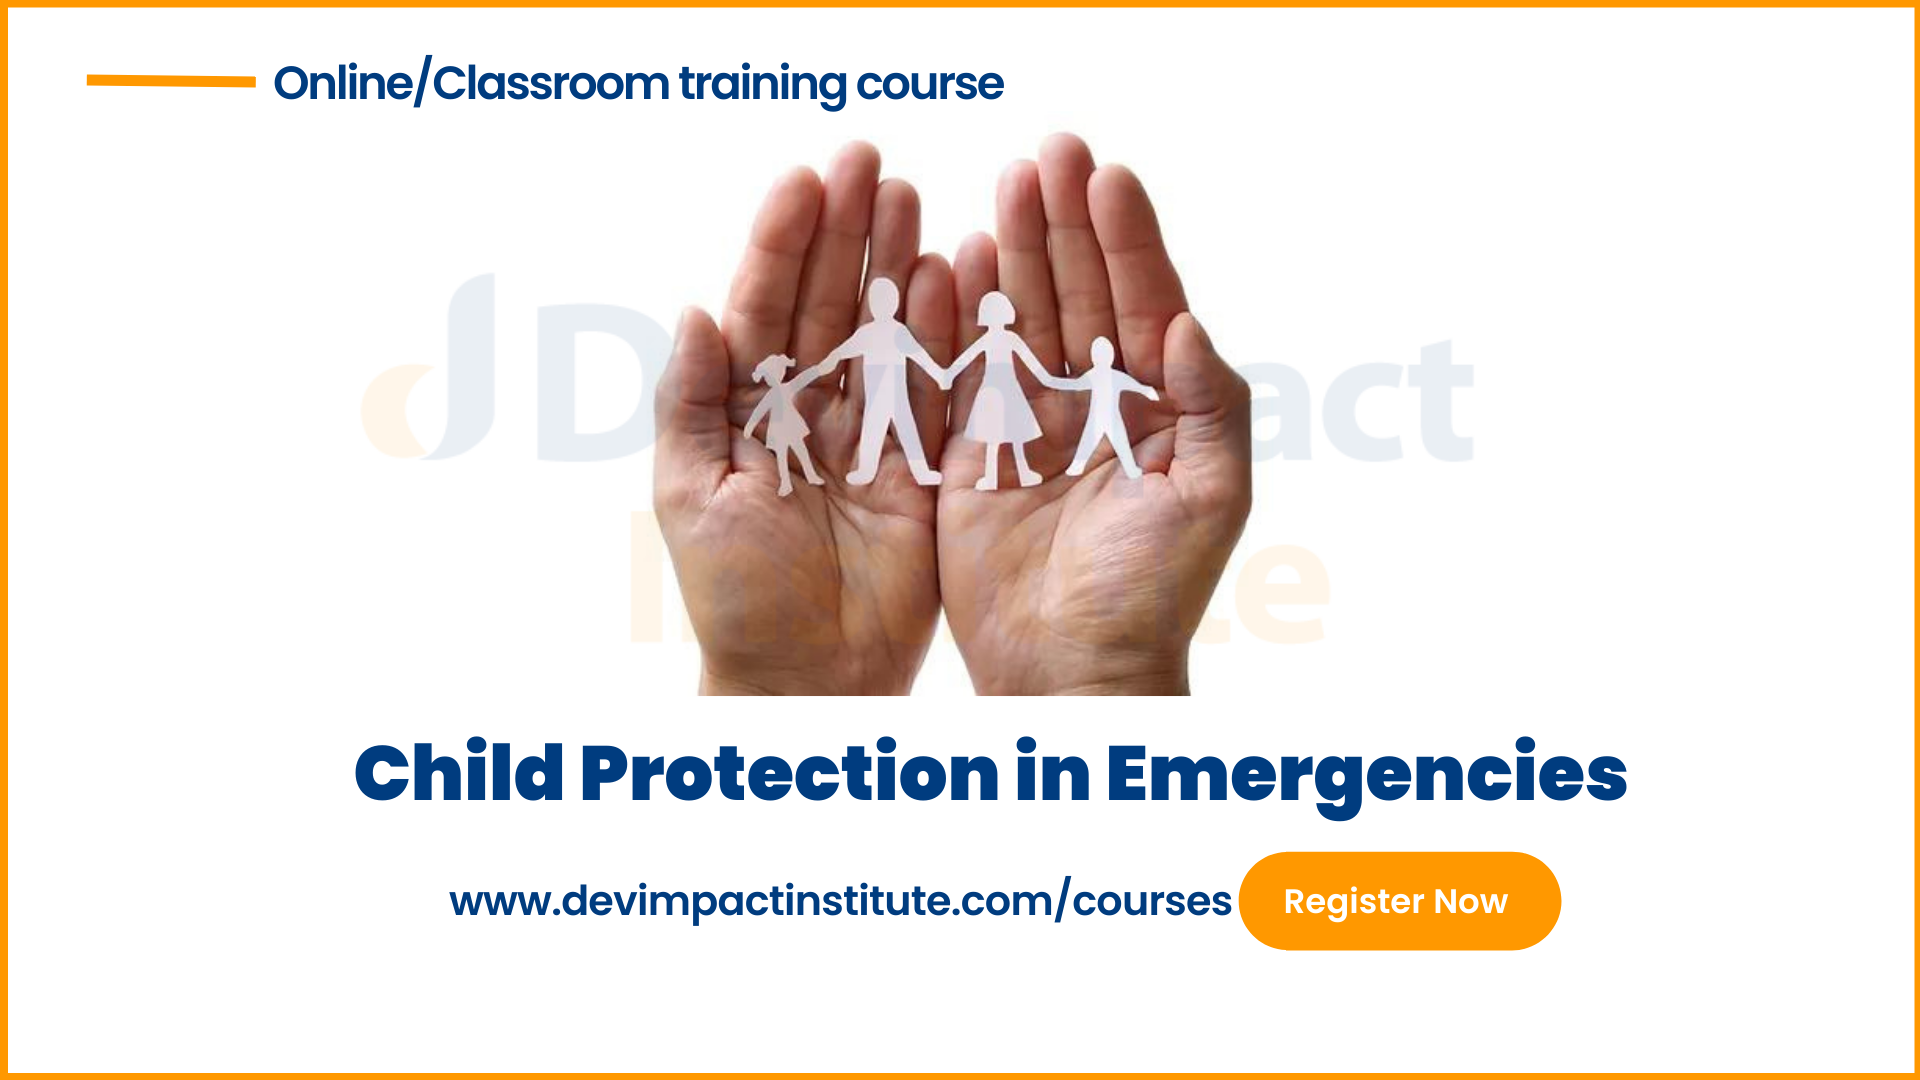 Training on Child Protection in Emergencies, Online Event